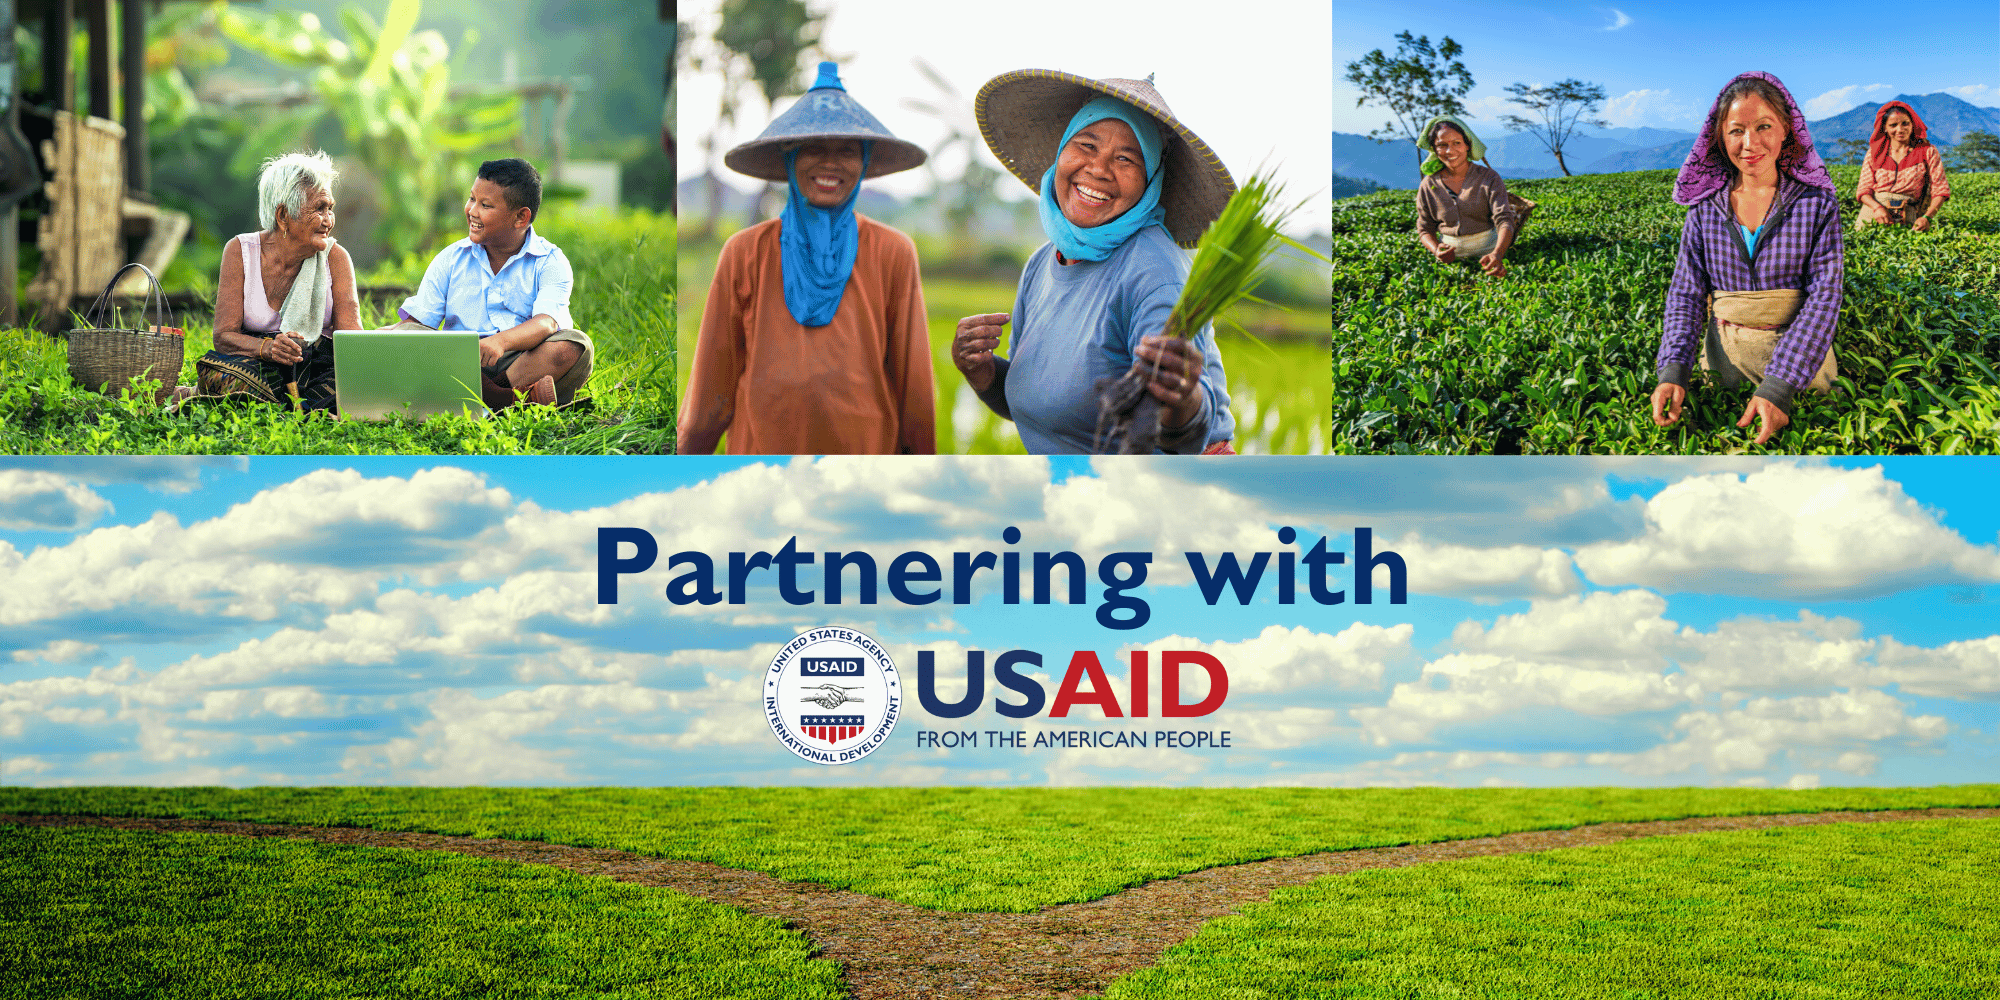 Partnering with USAID